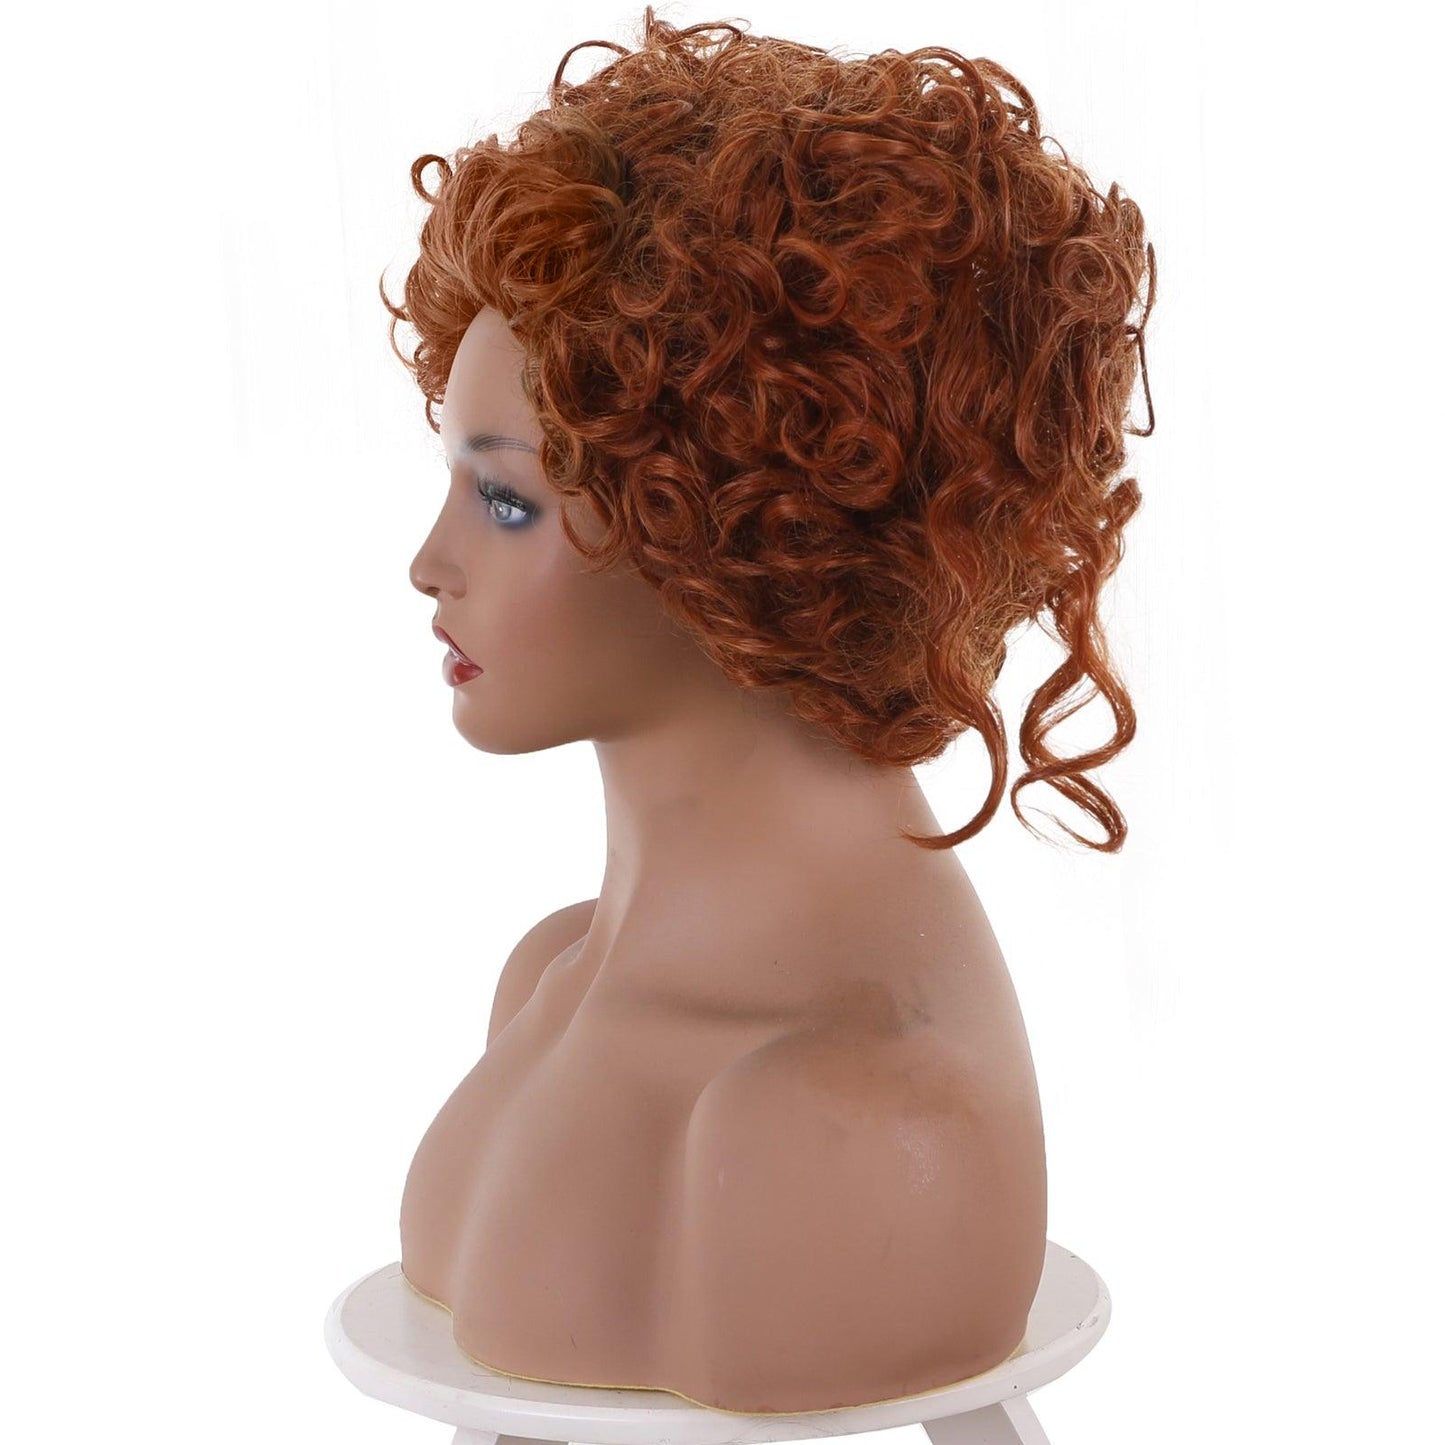 hocus pocus 2 winifred sanderson heart shaped brown movie cosplay wig 405s